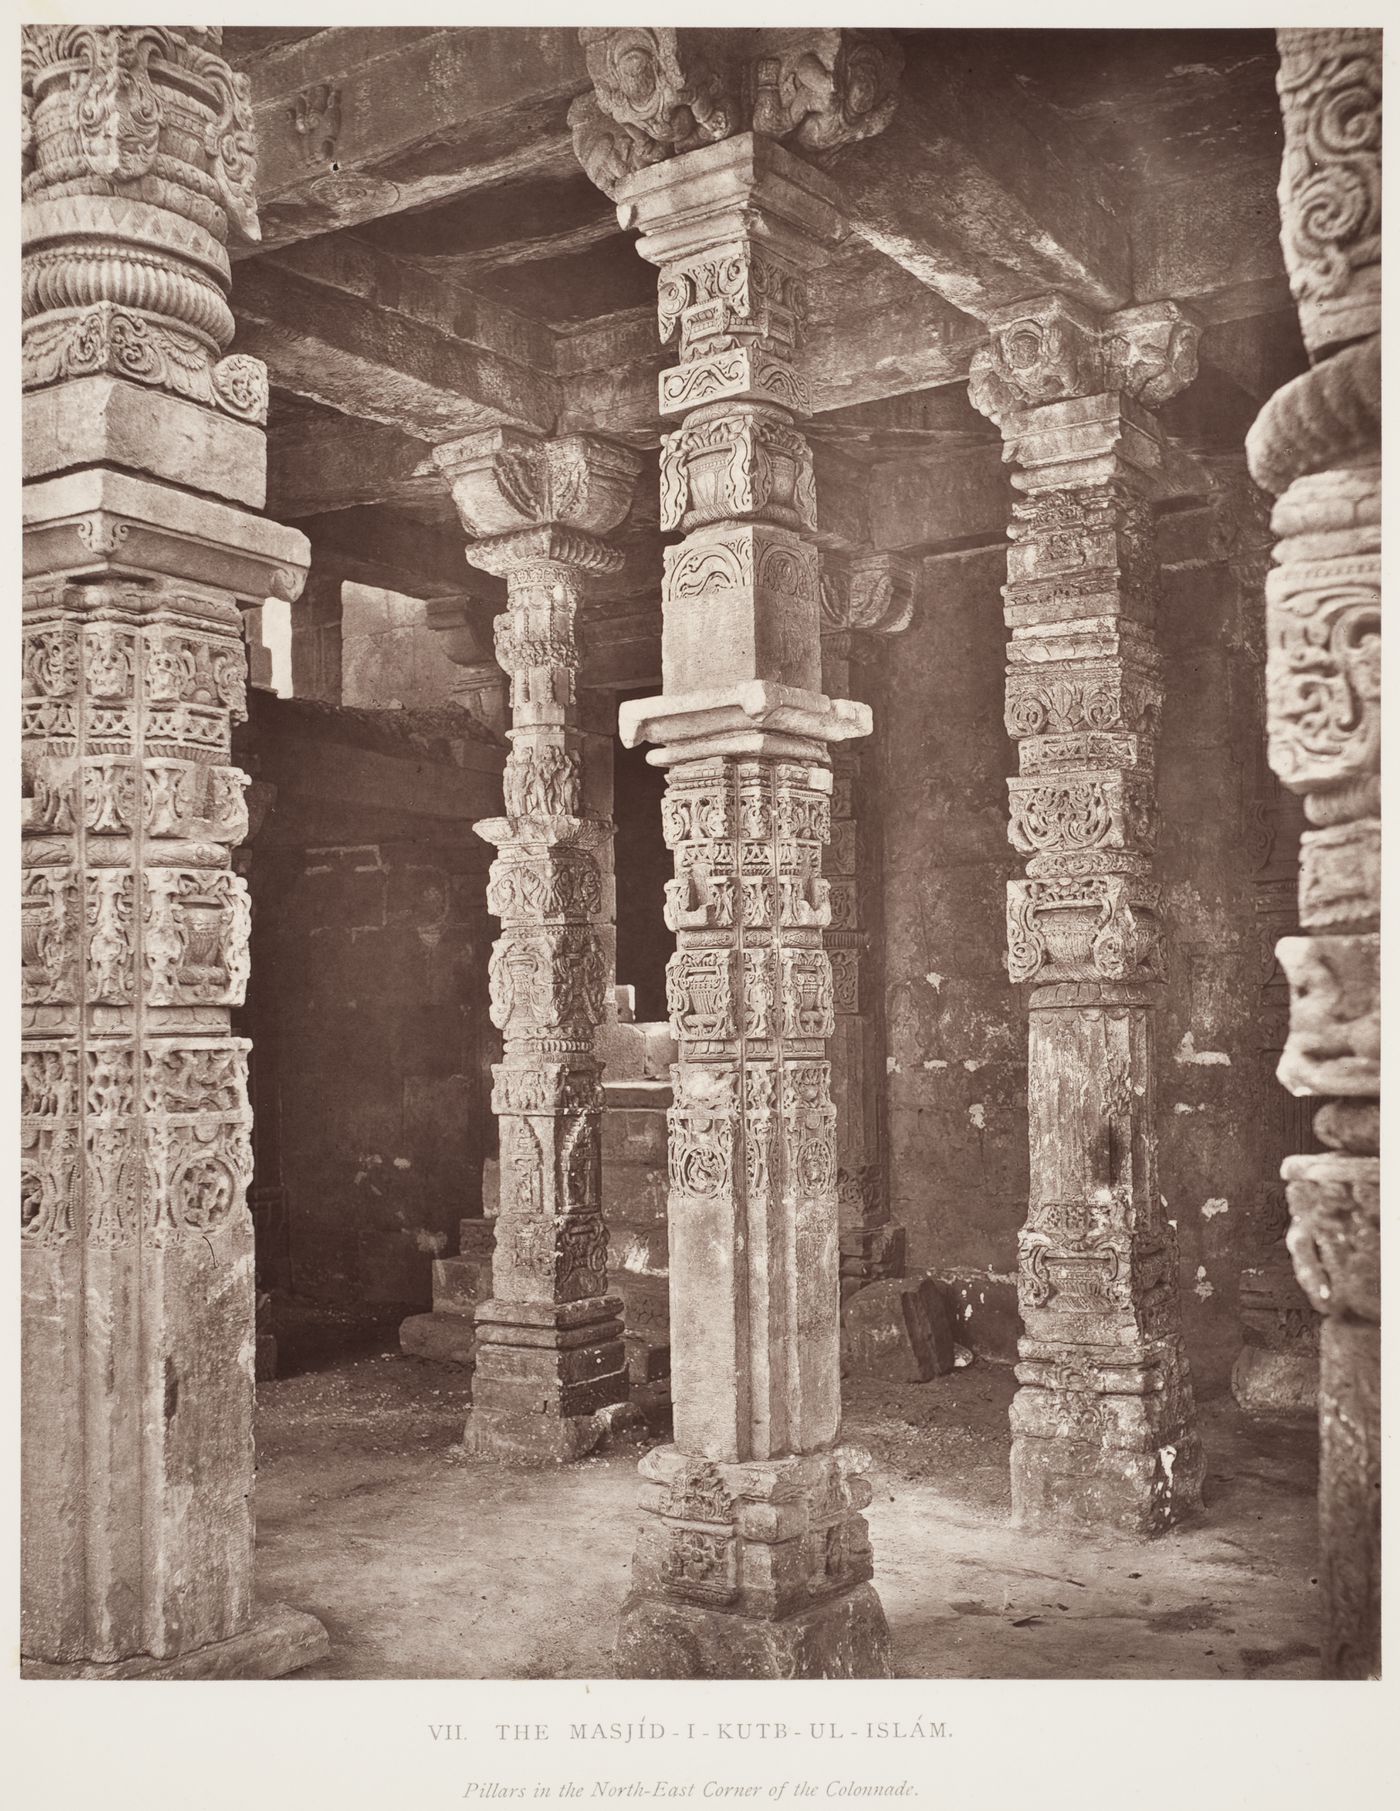 Interior view of the north-east corner of the colonnade showing pillars, Quwwat al-Islam [Might of Islam] Mosque, Quwwat al-Islam Mosque Complex, Delhi, India